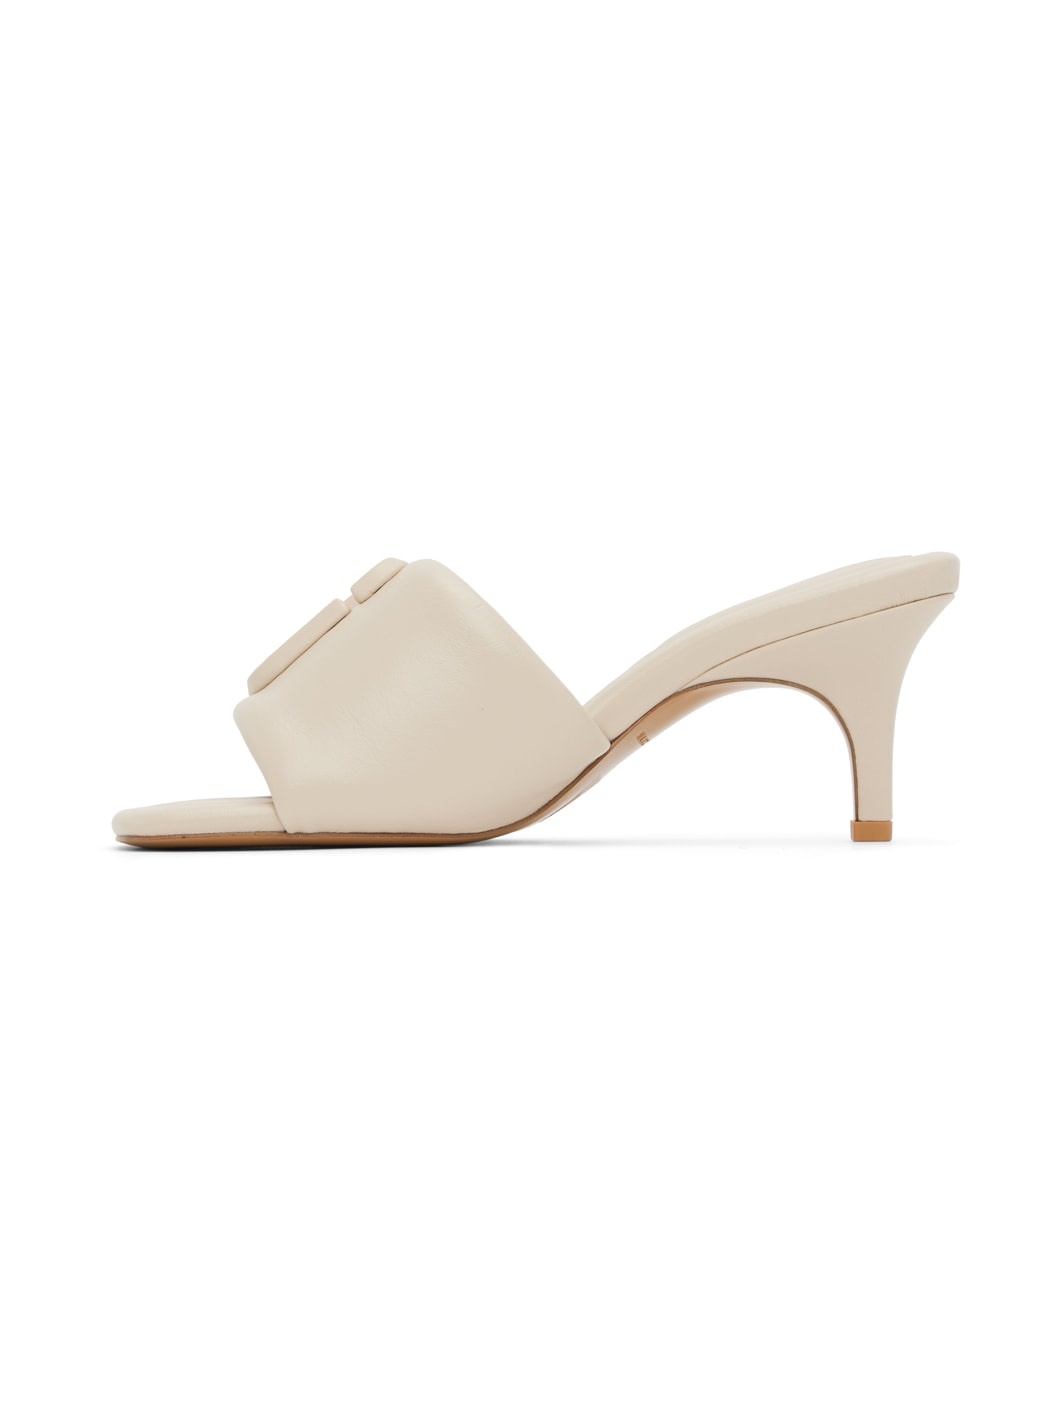 Off-White 'The Leather J Marc' Heeled Sandals - 3